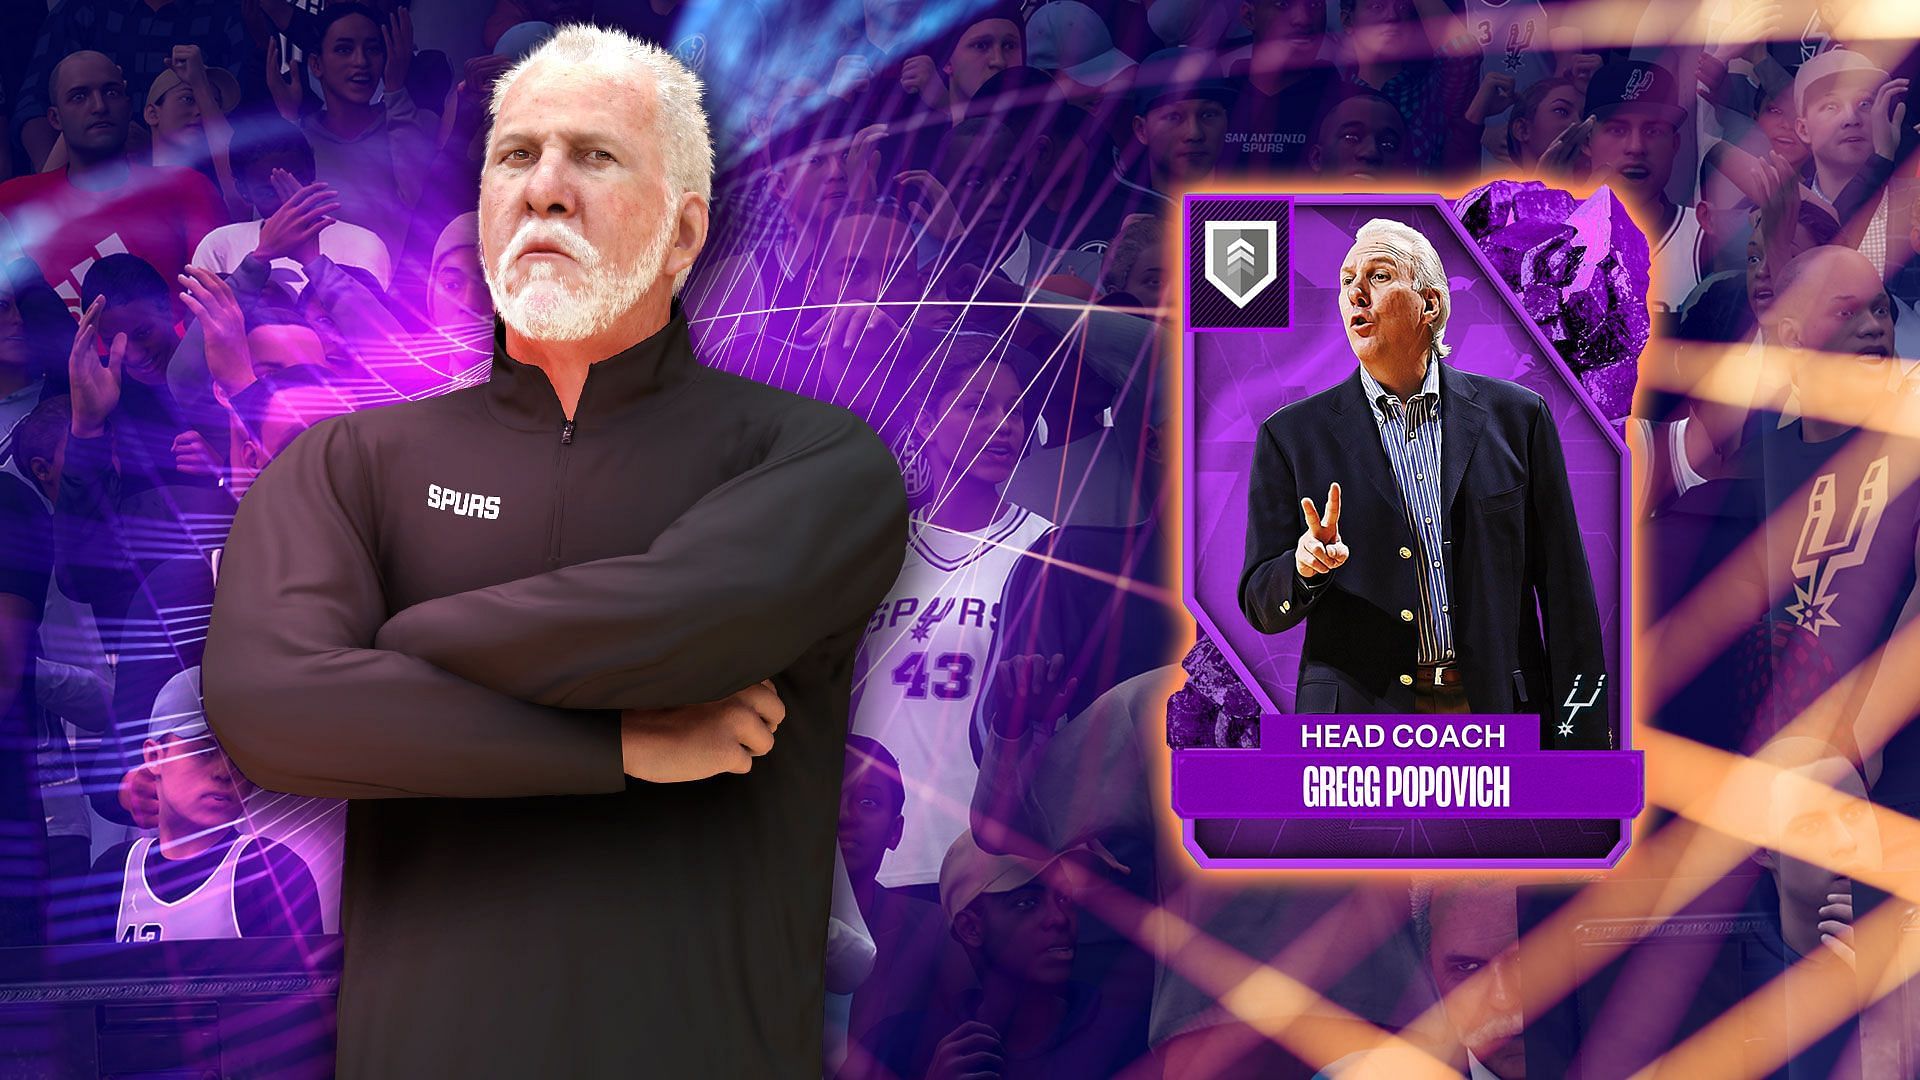 Greg Popovich will be available on the seasonal reward path (Image via 2K Games)